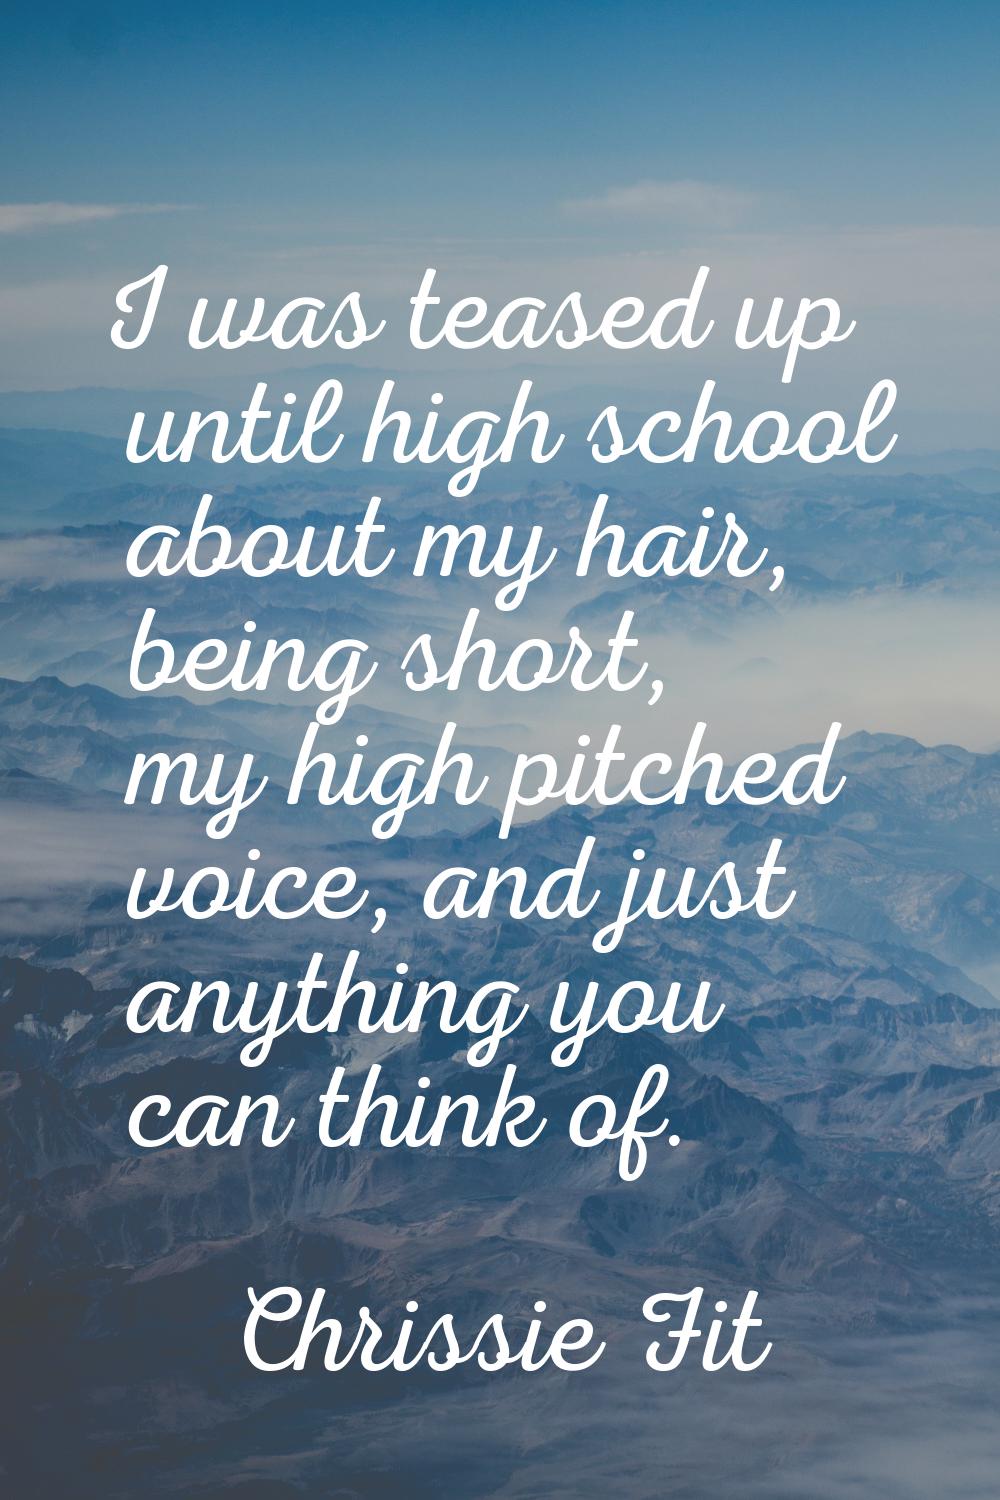 I was teased up until high school about my hair, being short, my high pitched voice, and just anyth